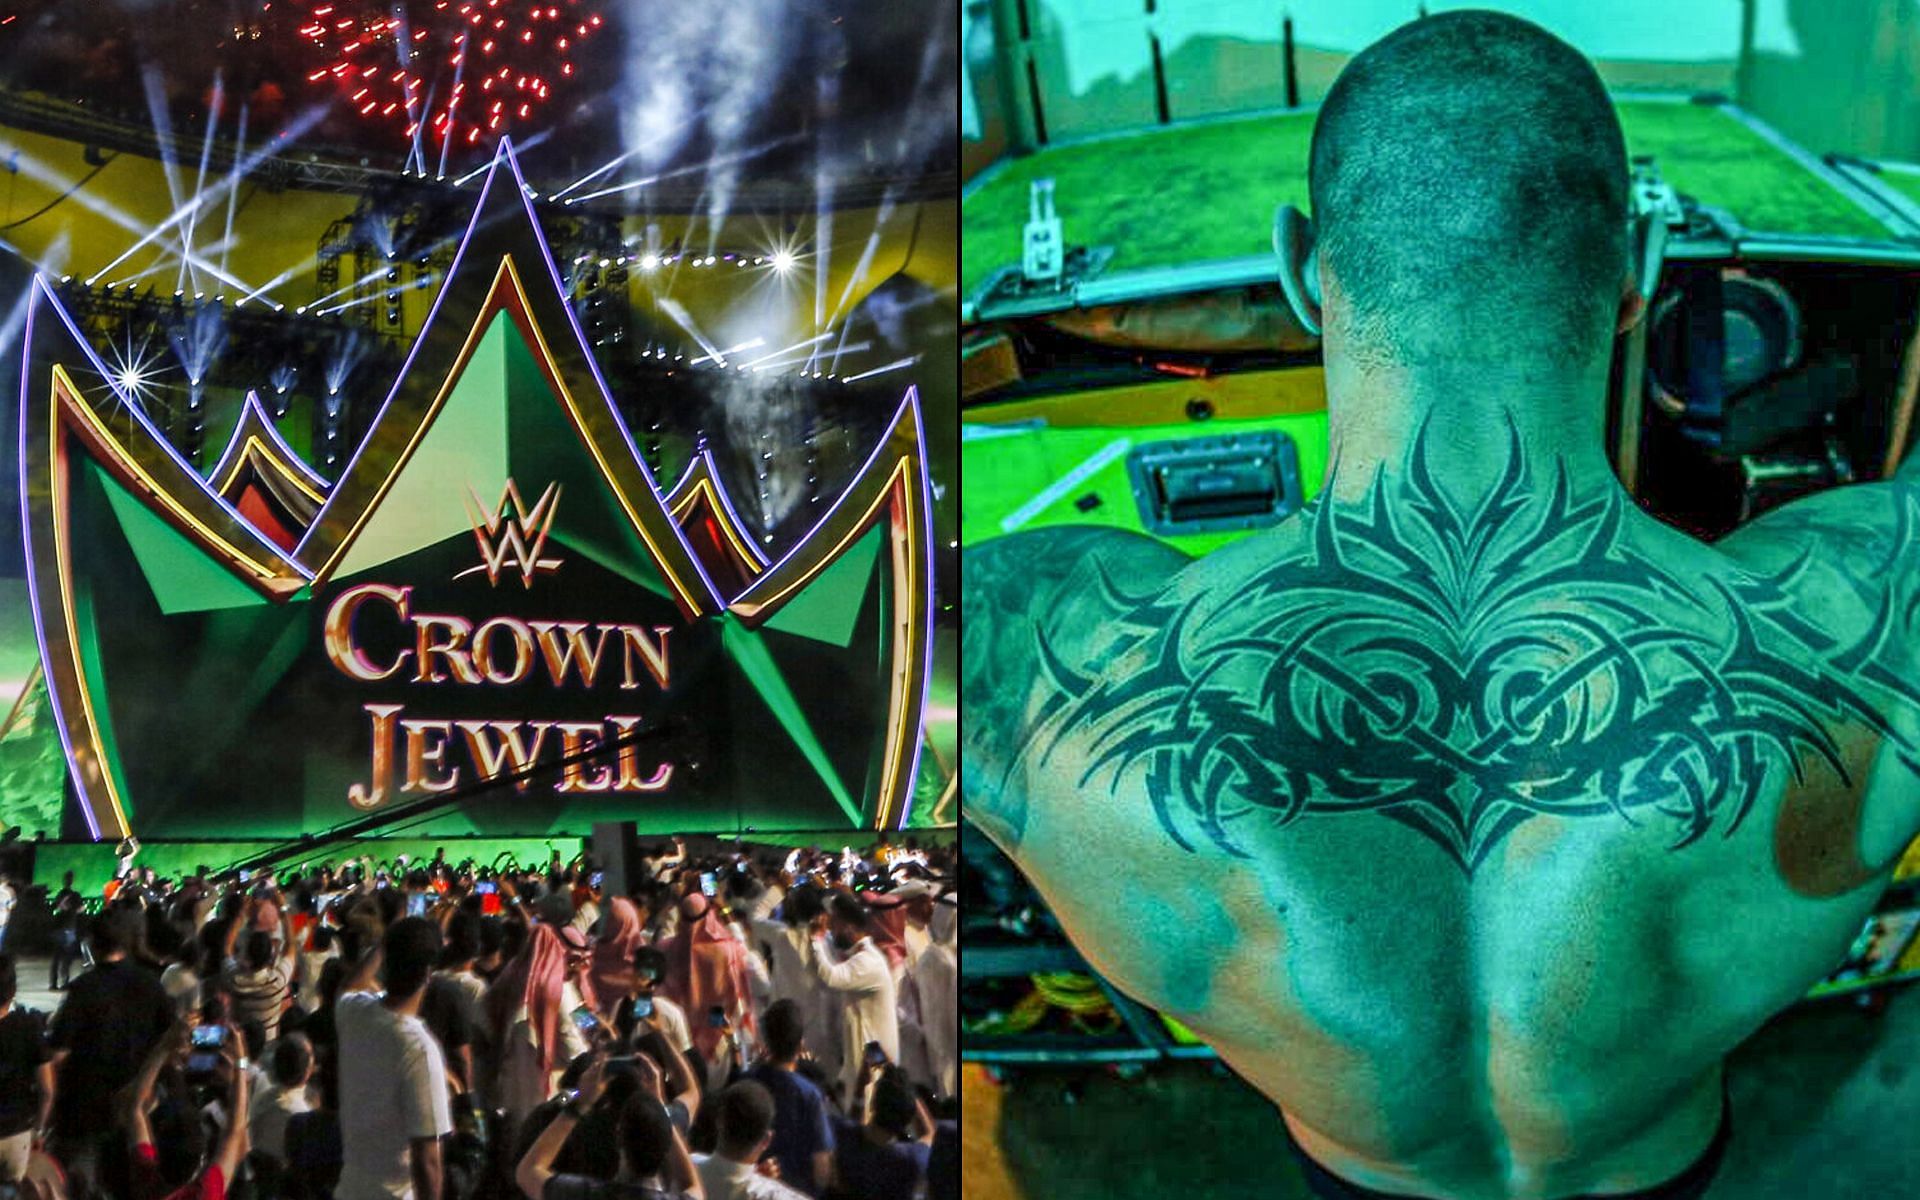 Crown Jewel 2023 is the next Premium Live event of WWE